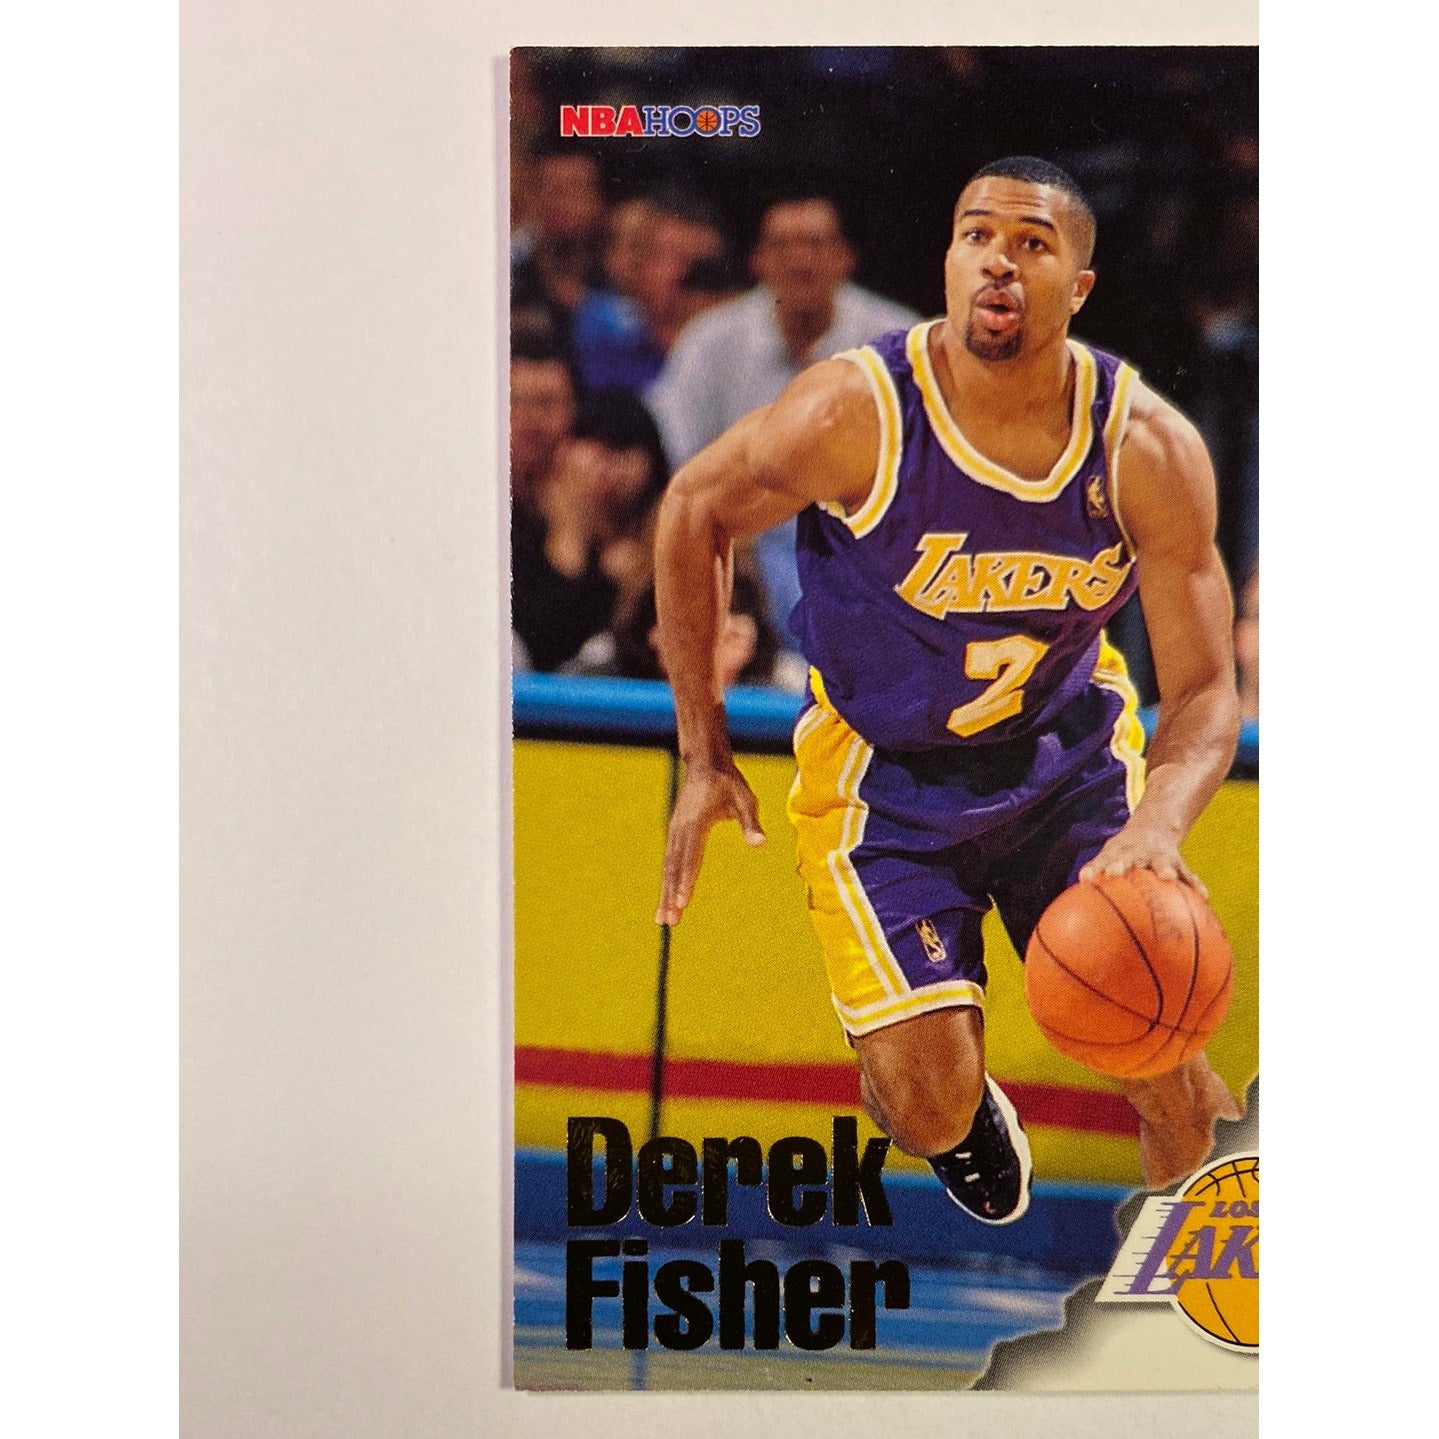  1996-97 Skybox Derek Fisher Official Skybox Rookies  Local Legends Cards & Collectibles